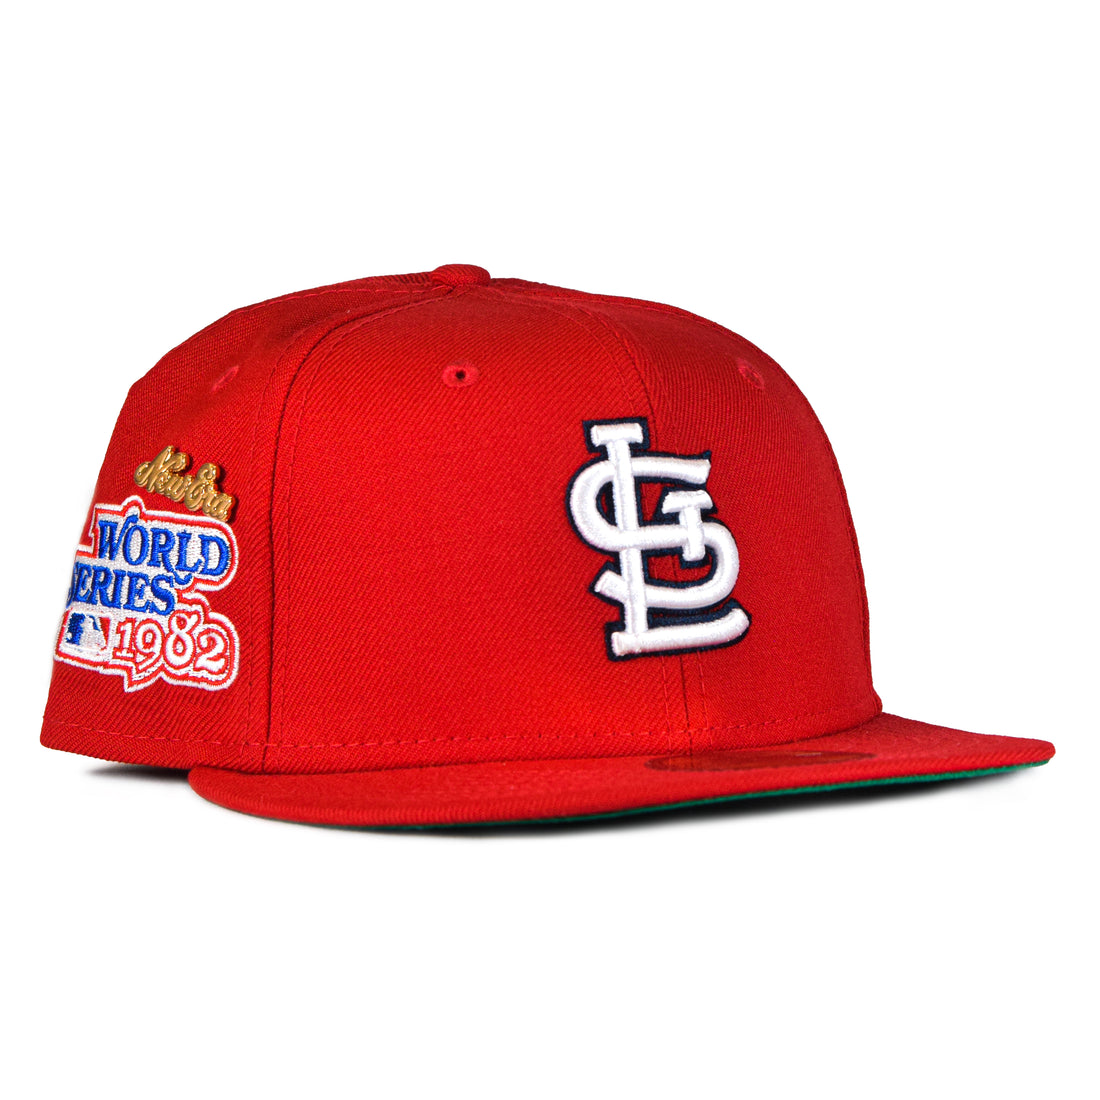 New Era St. Louis Cardinals 59Fifty Fitted - "5950 Day"